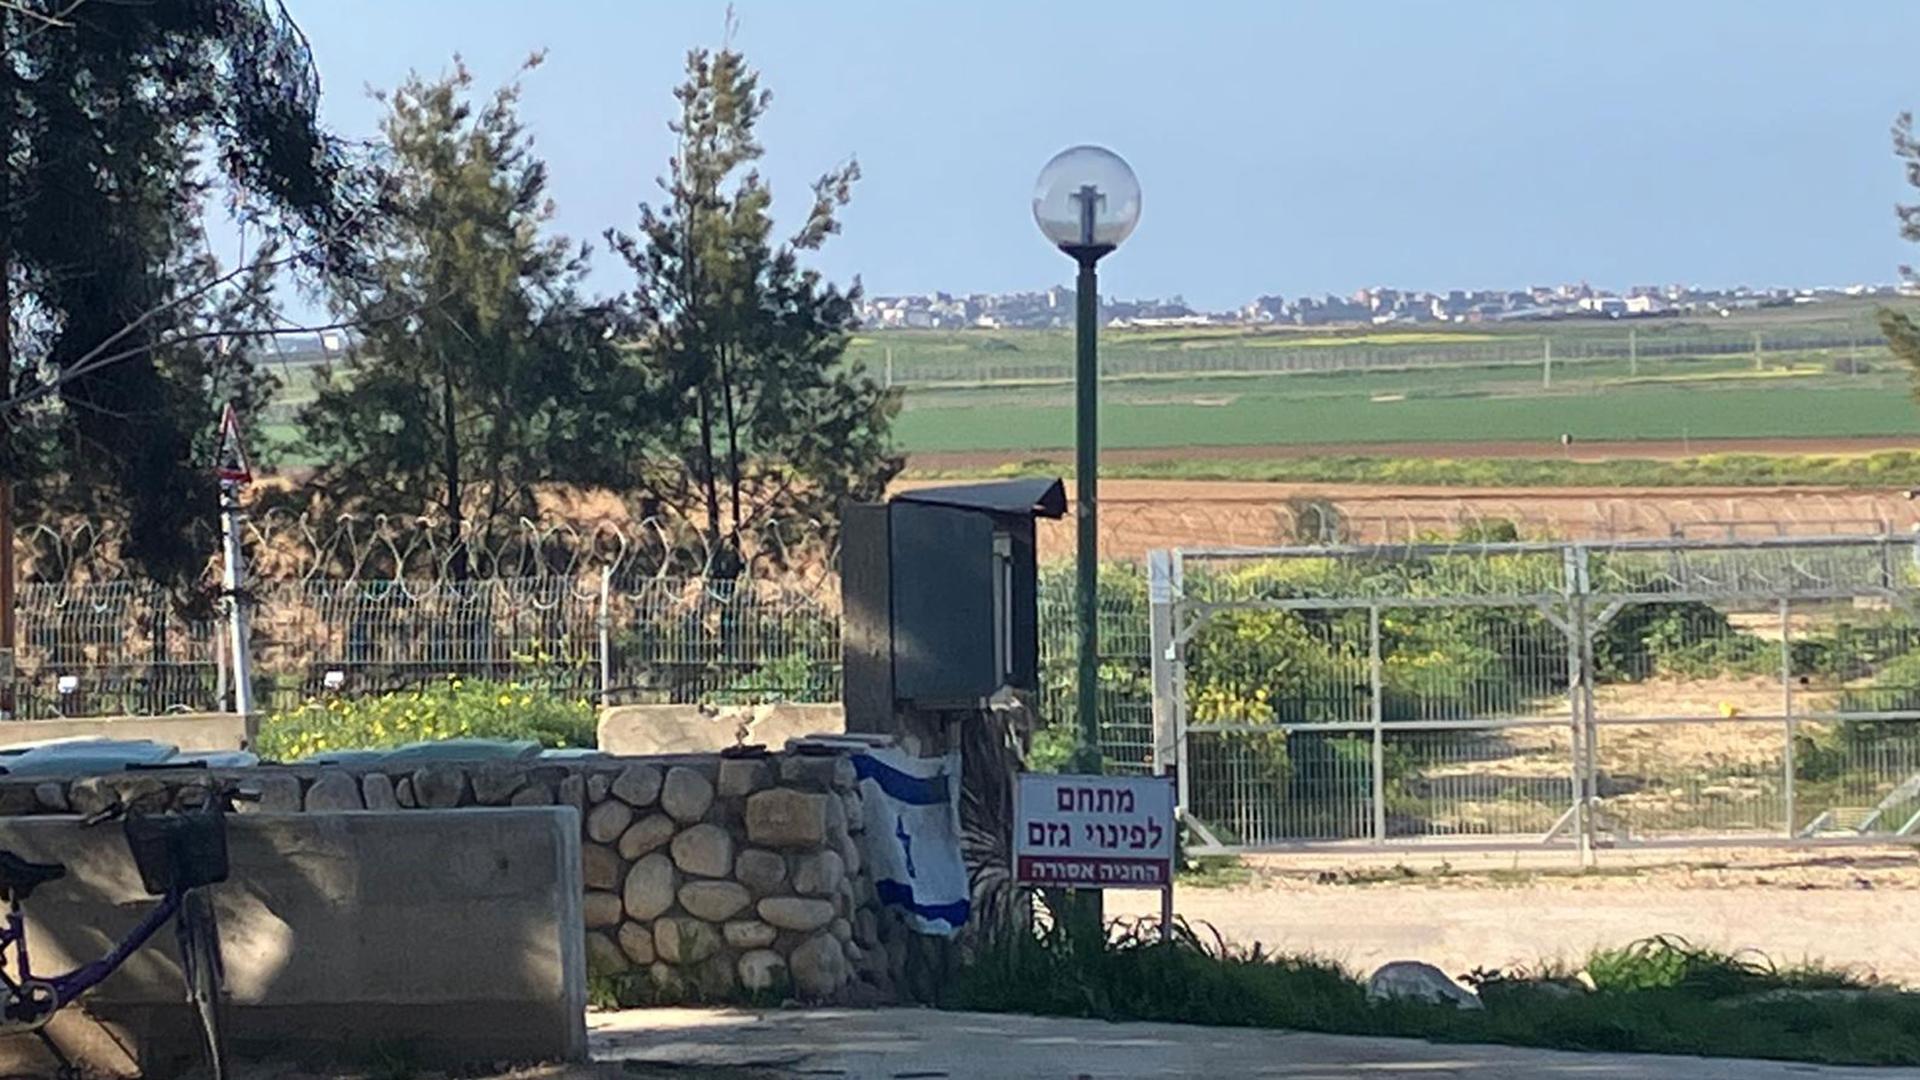 Hamas militants barricaded the fence on the early morning Oct. 7, killing 63 of Kibbutz Kfar Aza's 970 residents. Northern Gaza, seen in the distance, is only a mile away from the kibbutz.